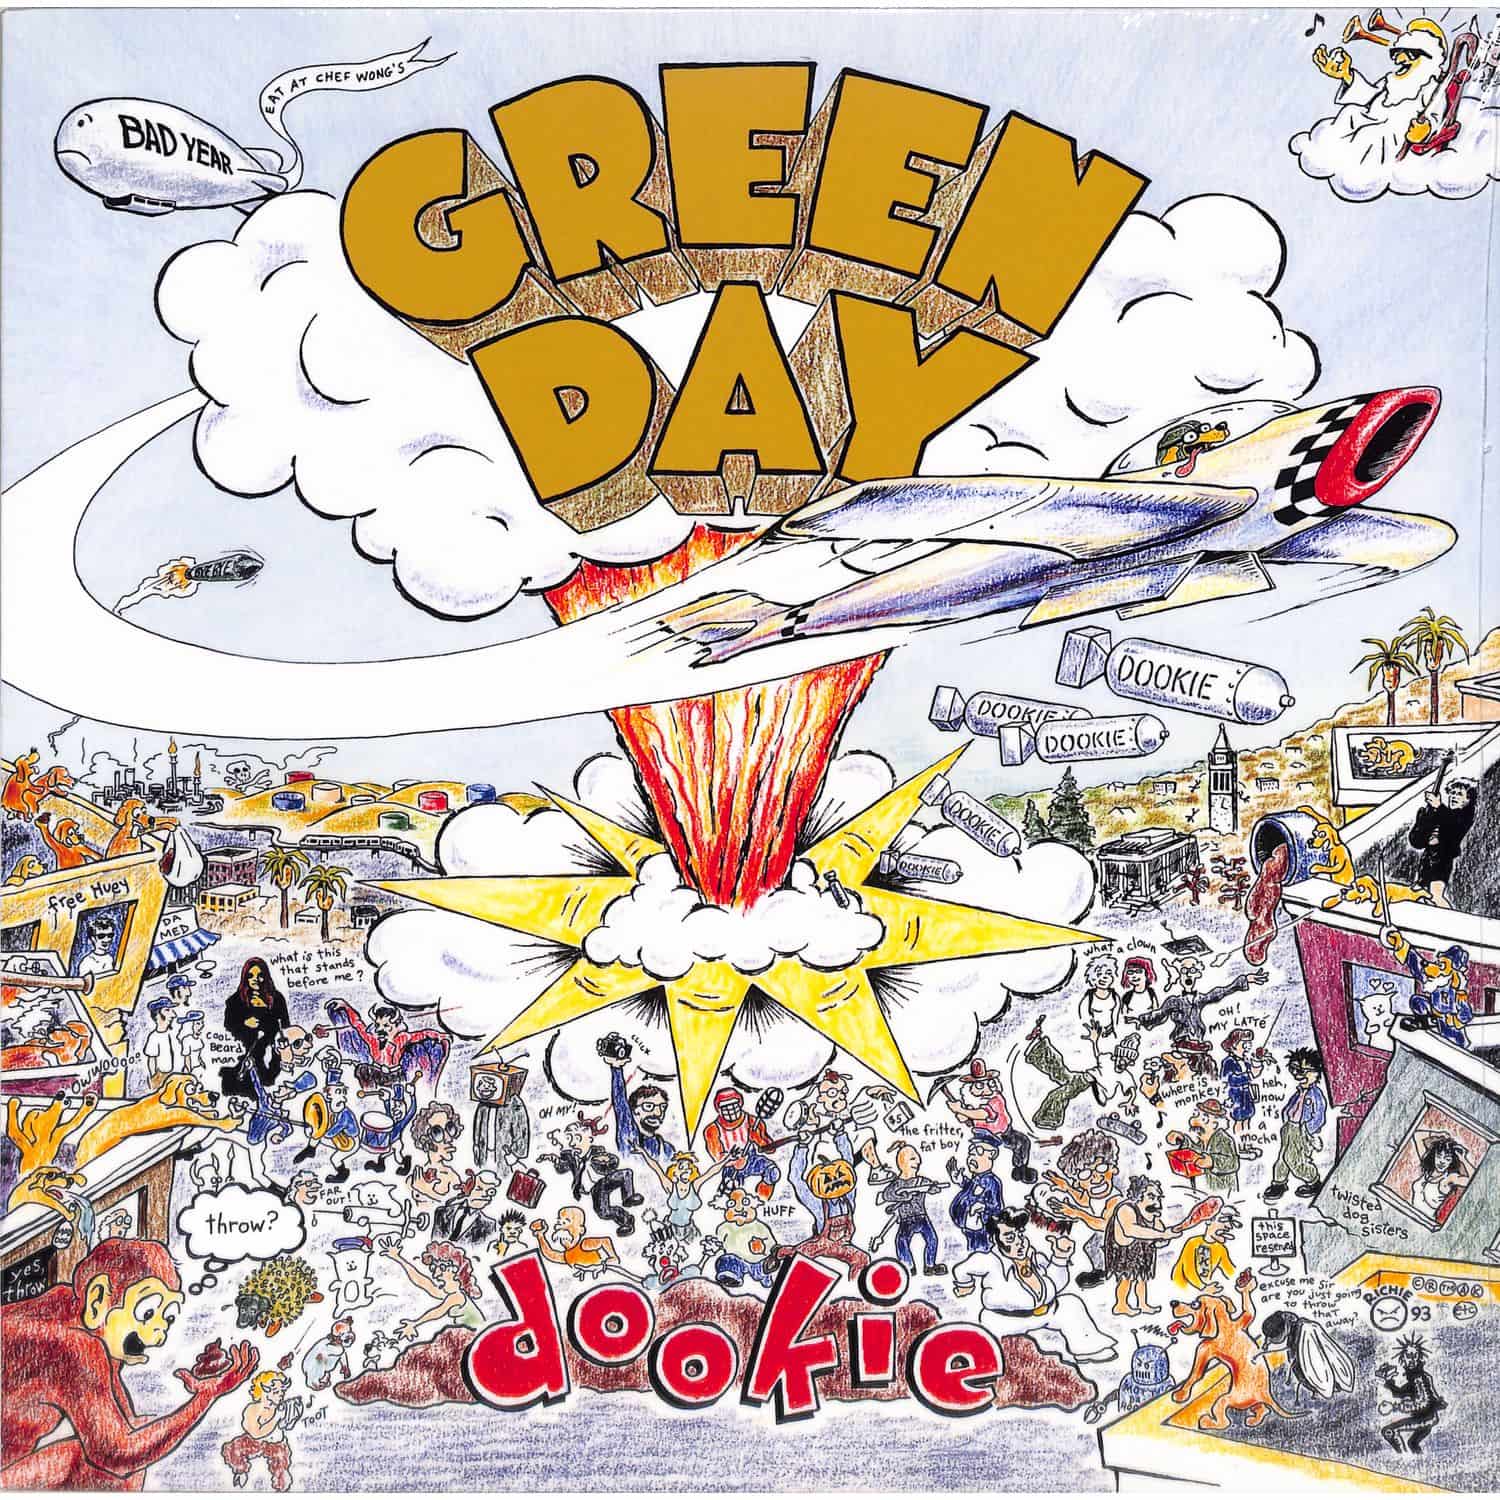 Green Day - DOOKIE 